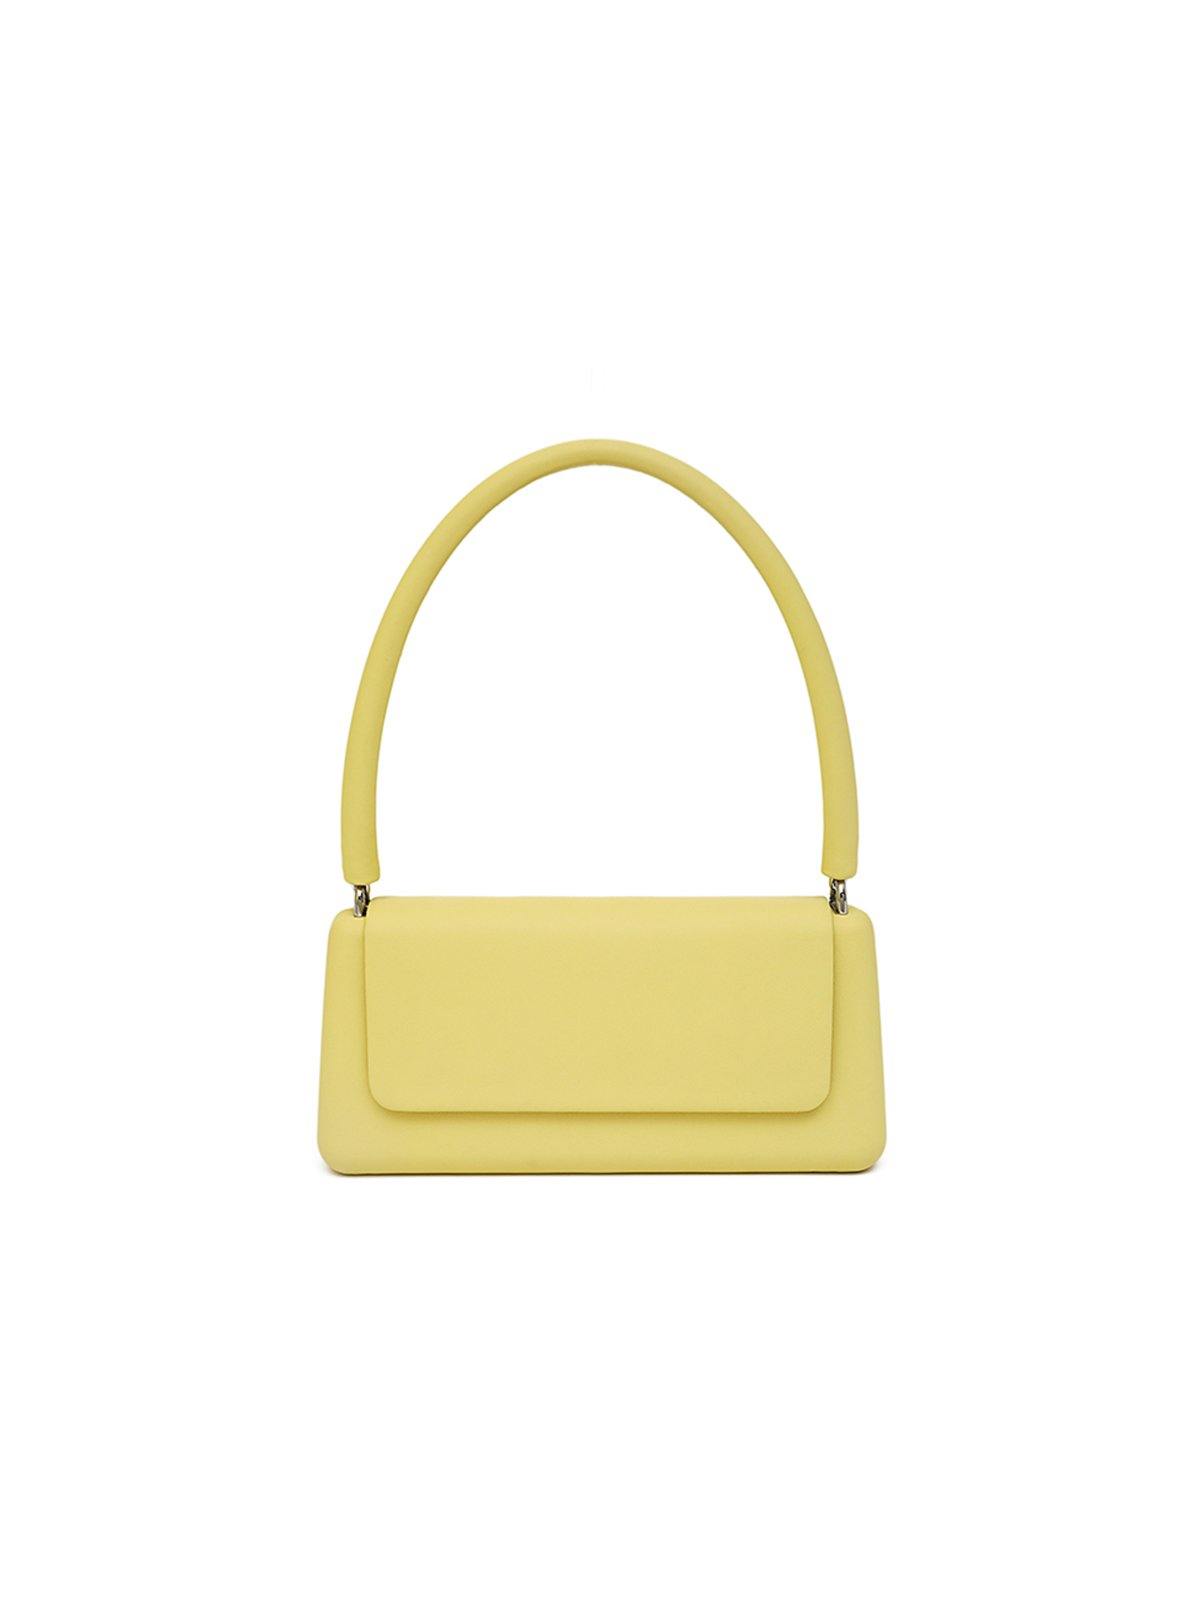 Heritage Vintage: Chanel Yellow Rubber Tote.  Luxury Accessories, Lot  #77001